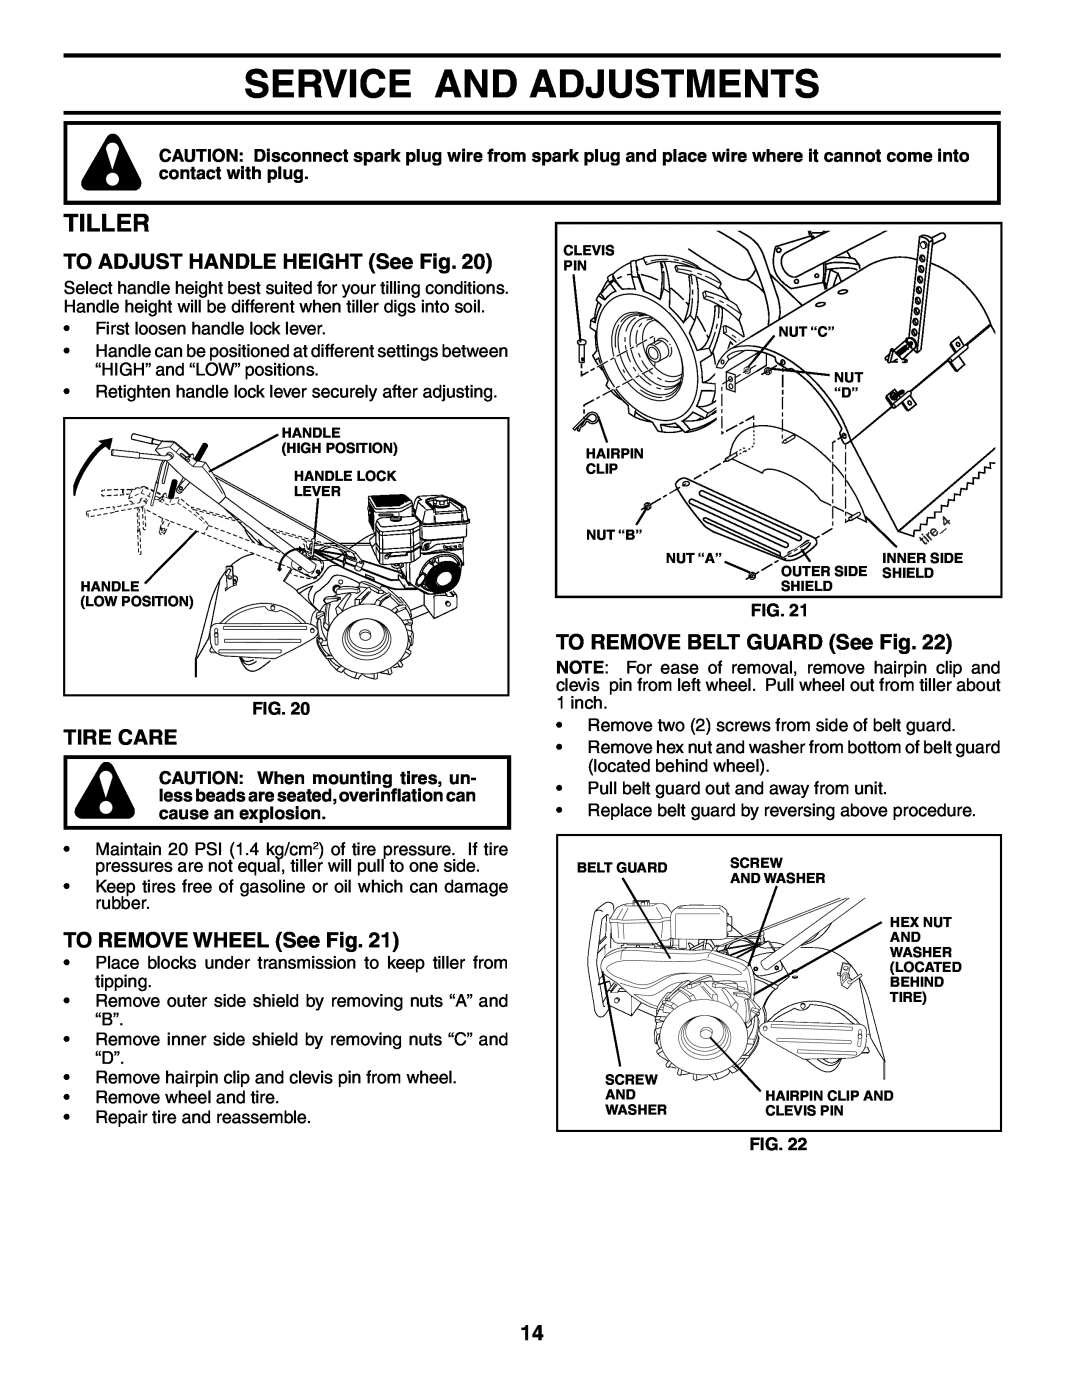 Poulan PRRT65 manual Service And Adjustments, Tiller, TO ADJUST HANDLE HEIGHT See Fig, Tire Care, TO REMOVE WHEEL See Fig 